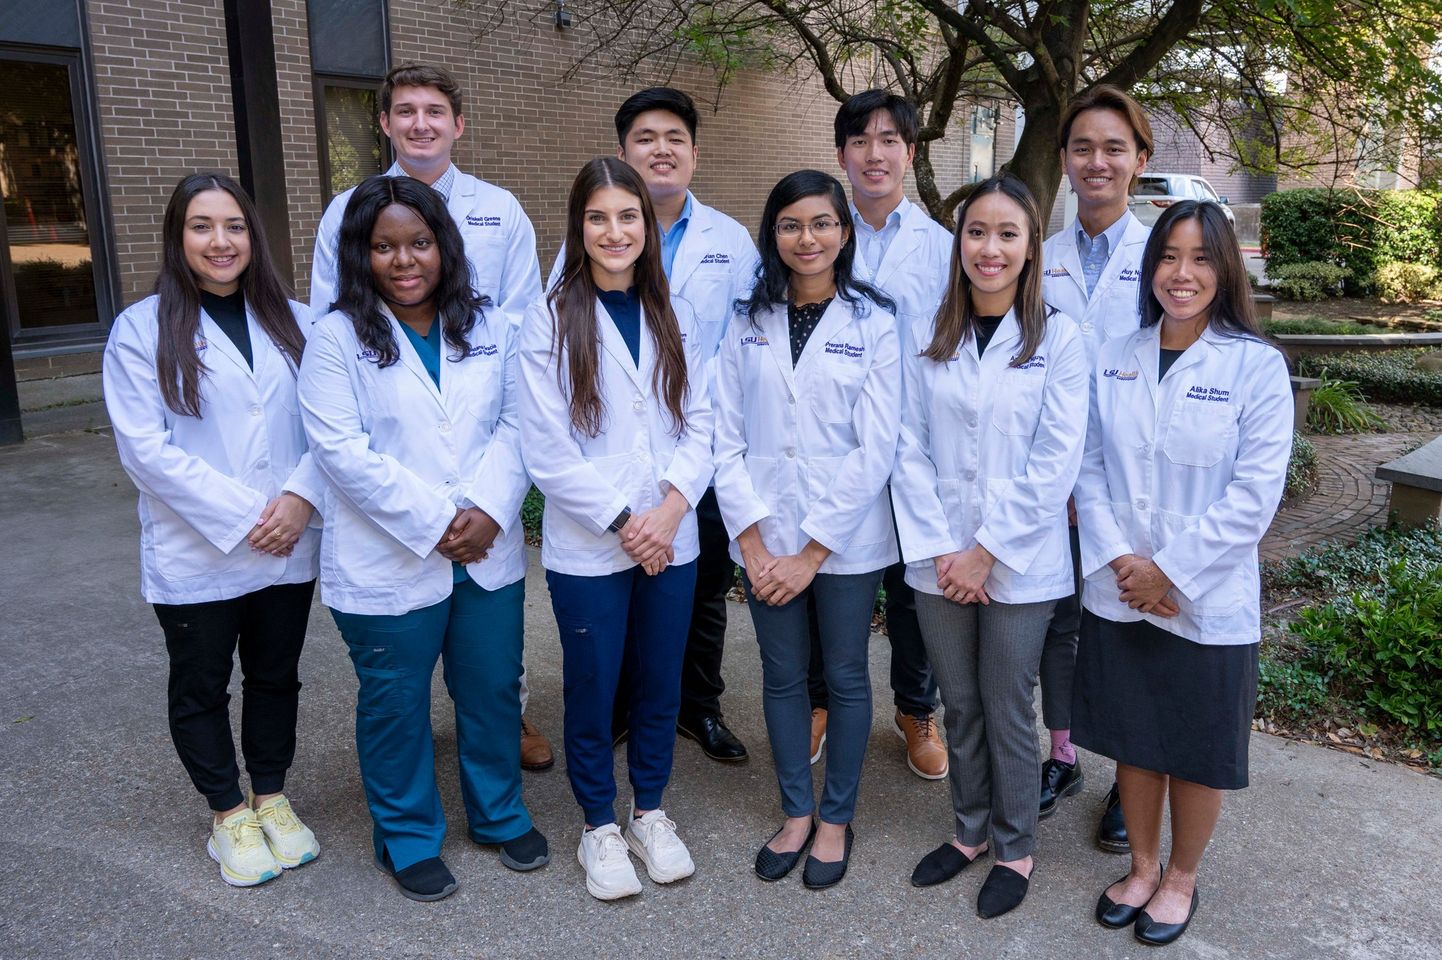 10 White Coat Scholars from the LSU Health Shreveport Class of 2026 